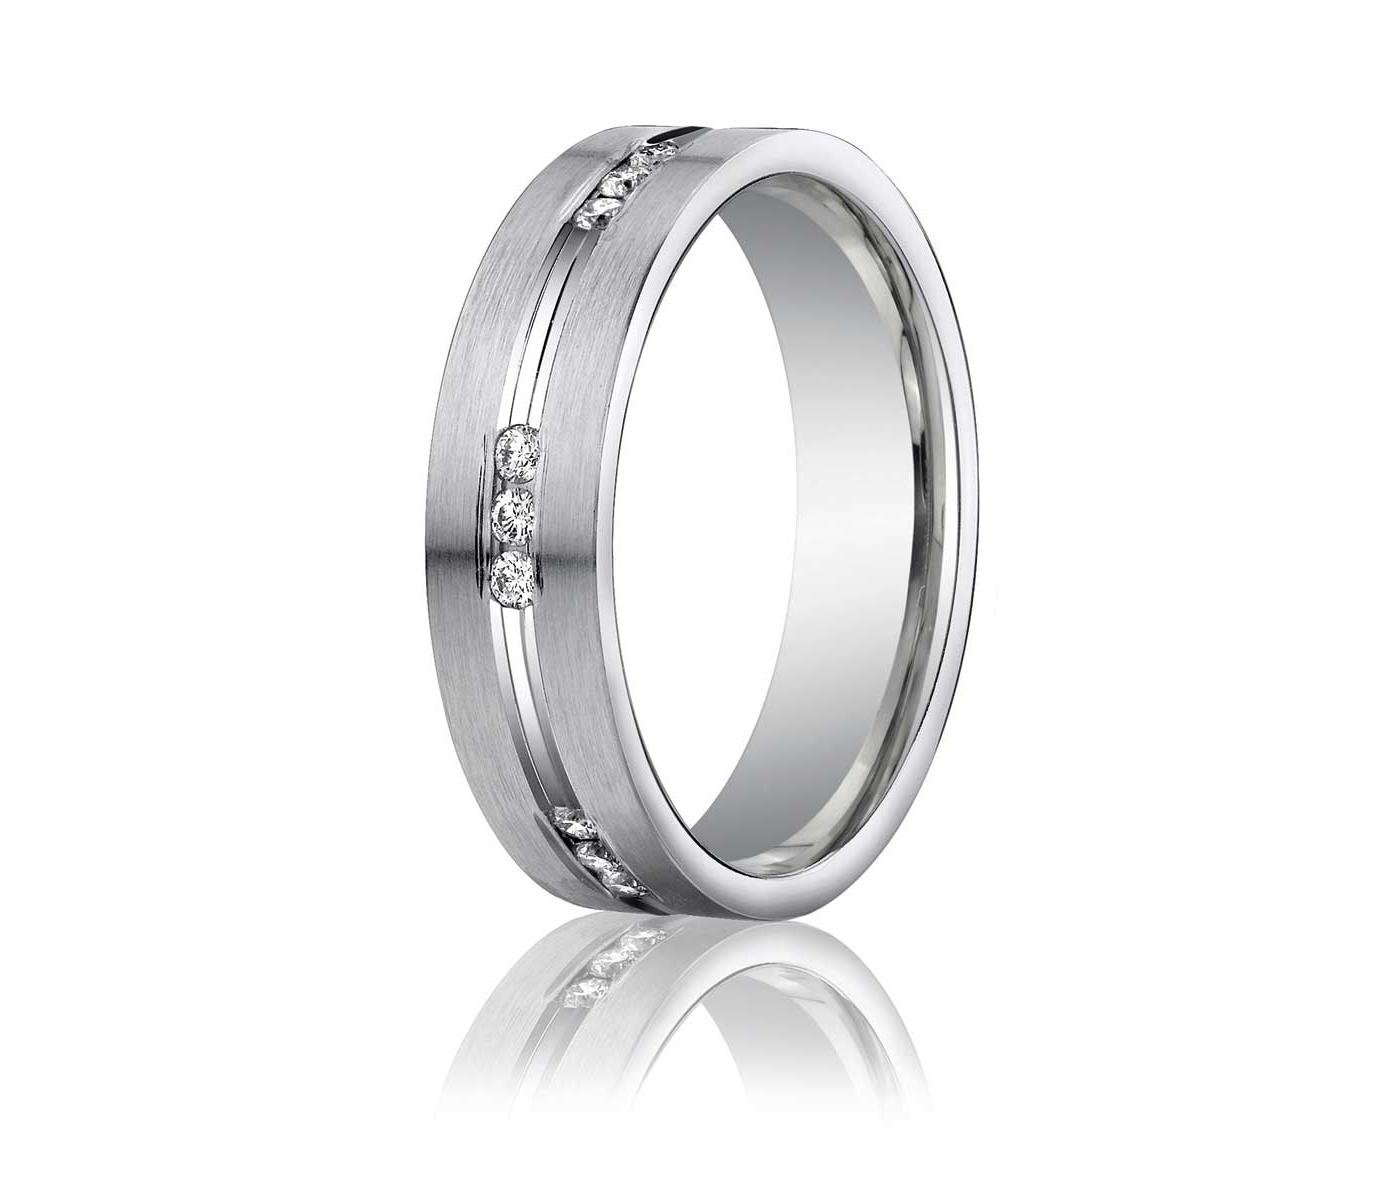 Ring by Benchmark